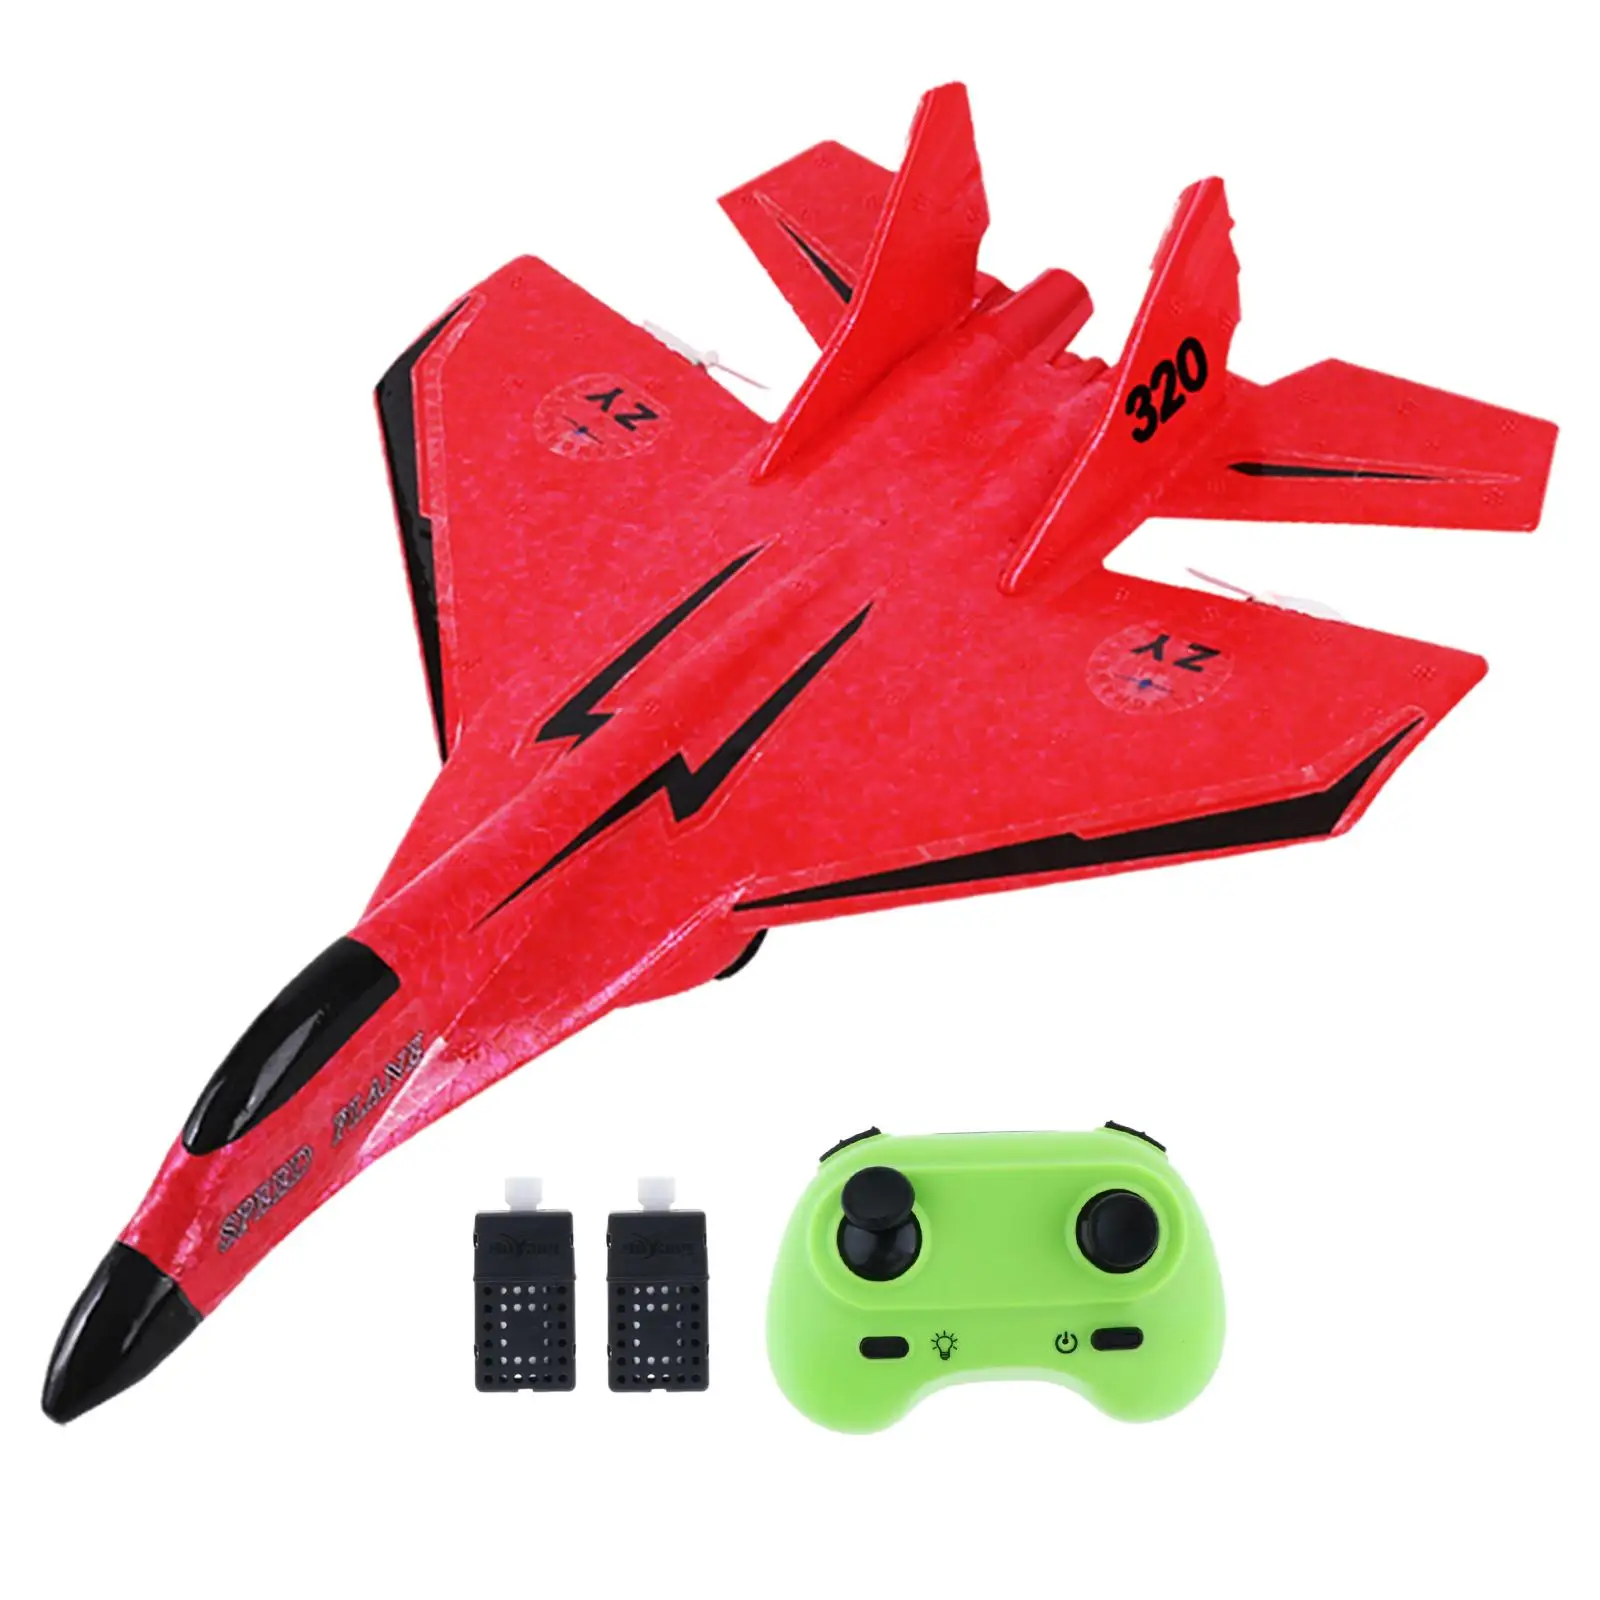 

2 CH RC Plane Ready to Fly Portable Easy to Fly Airplane Hobby RC Glider RC Aircraft Jet for Kids Beginner Boys Girls